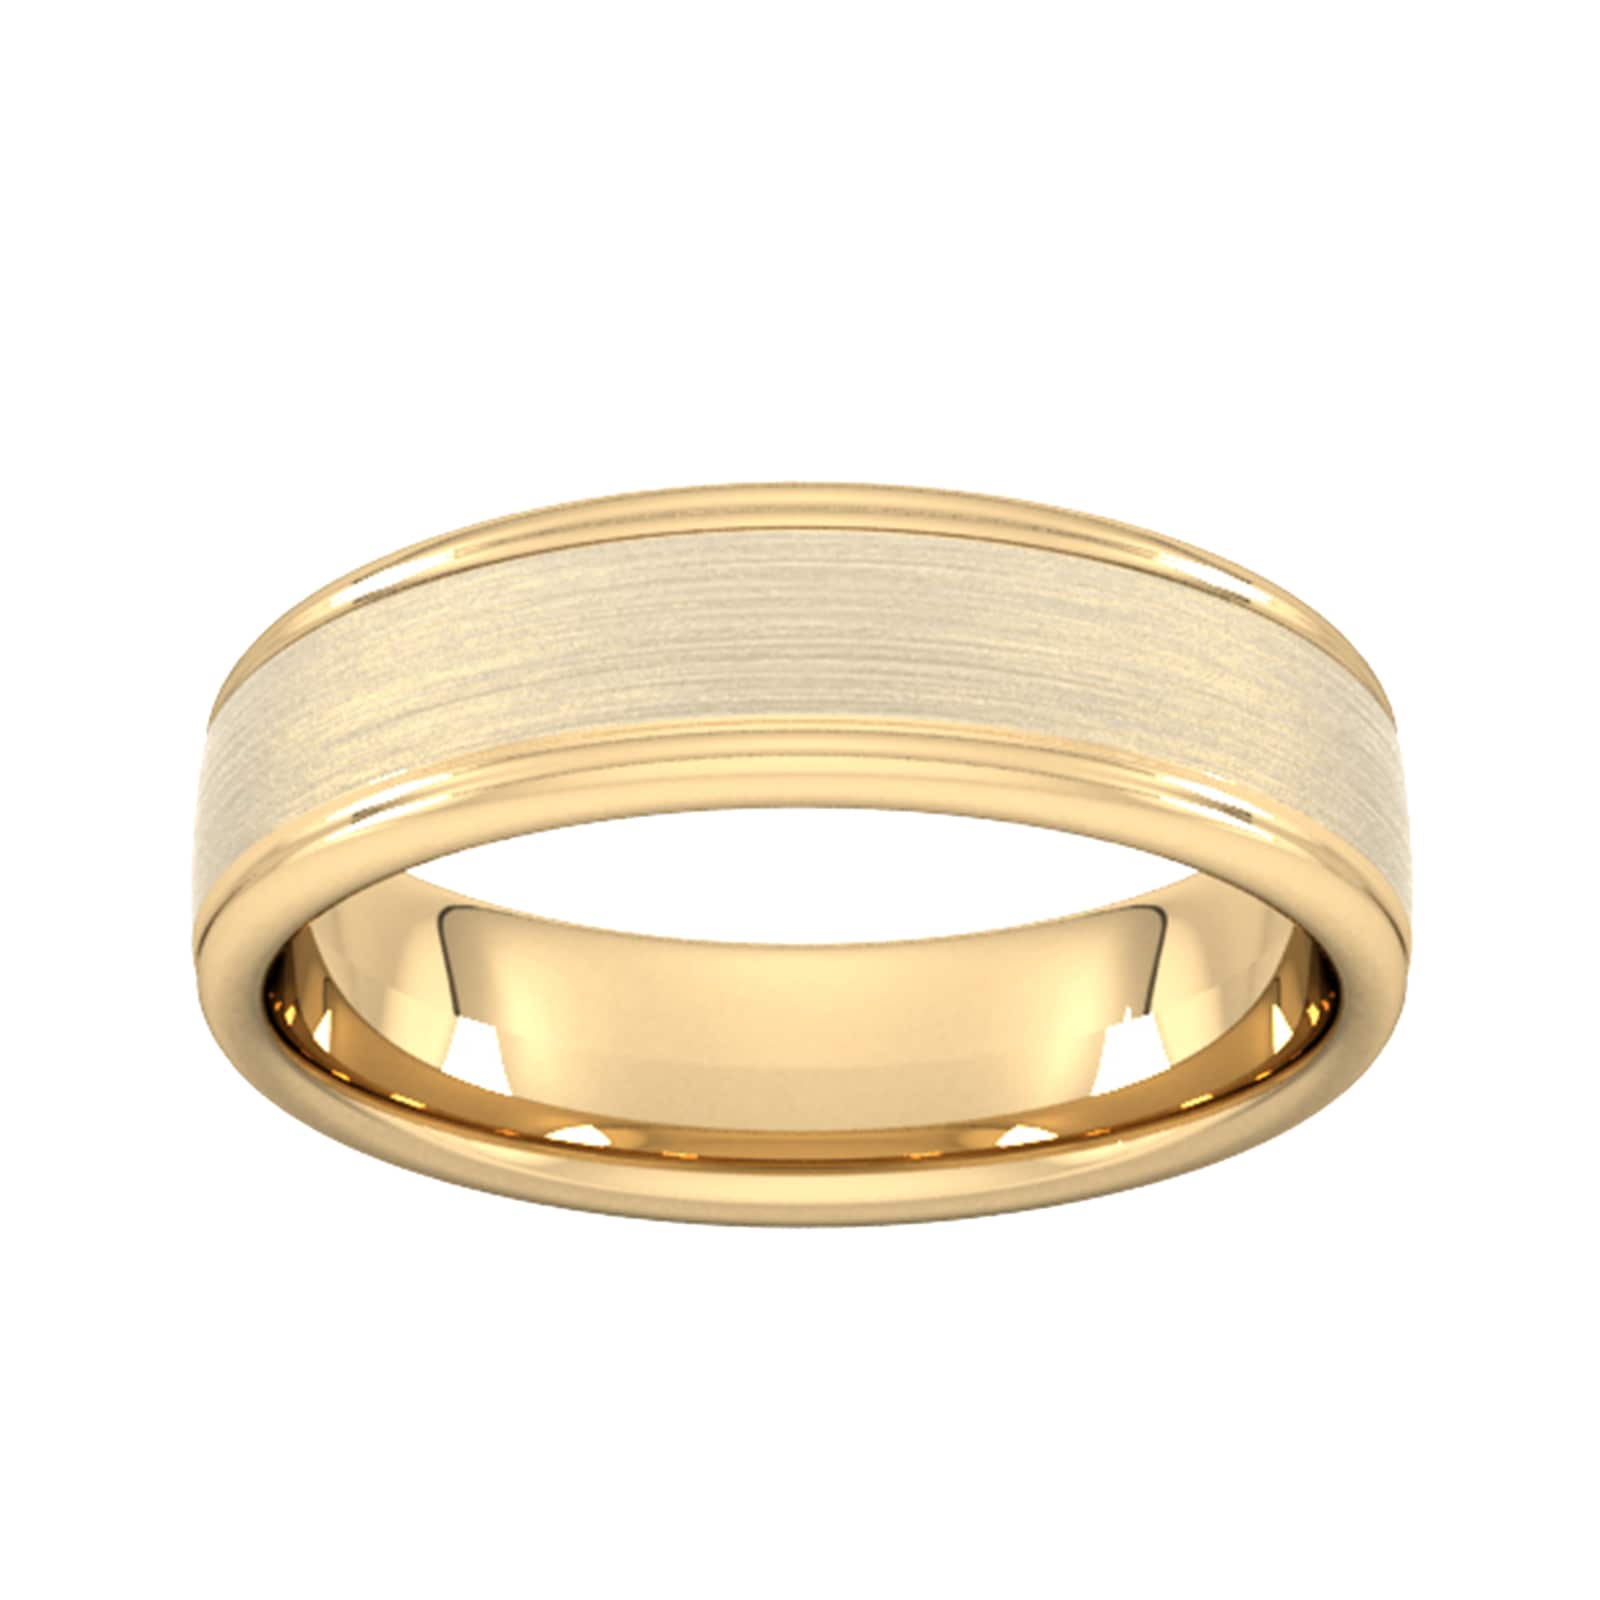 6mm Slight Court Heavy Matt Centre With Grooves Wedding Ring In 18 Carat Yellow Gold - Ring Size I